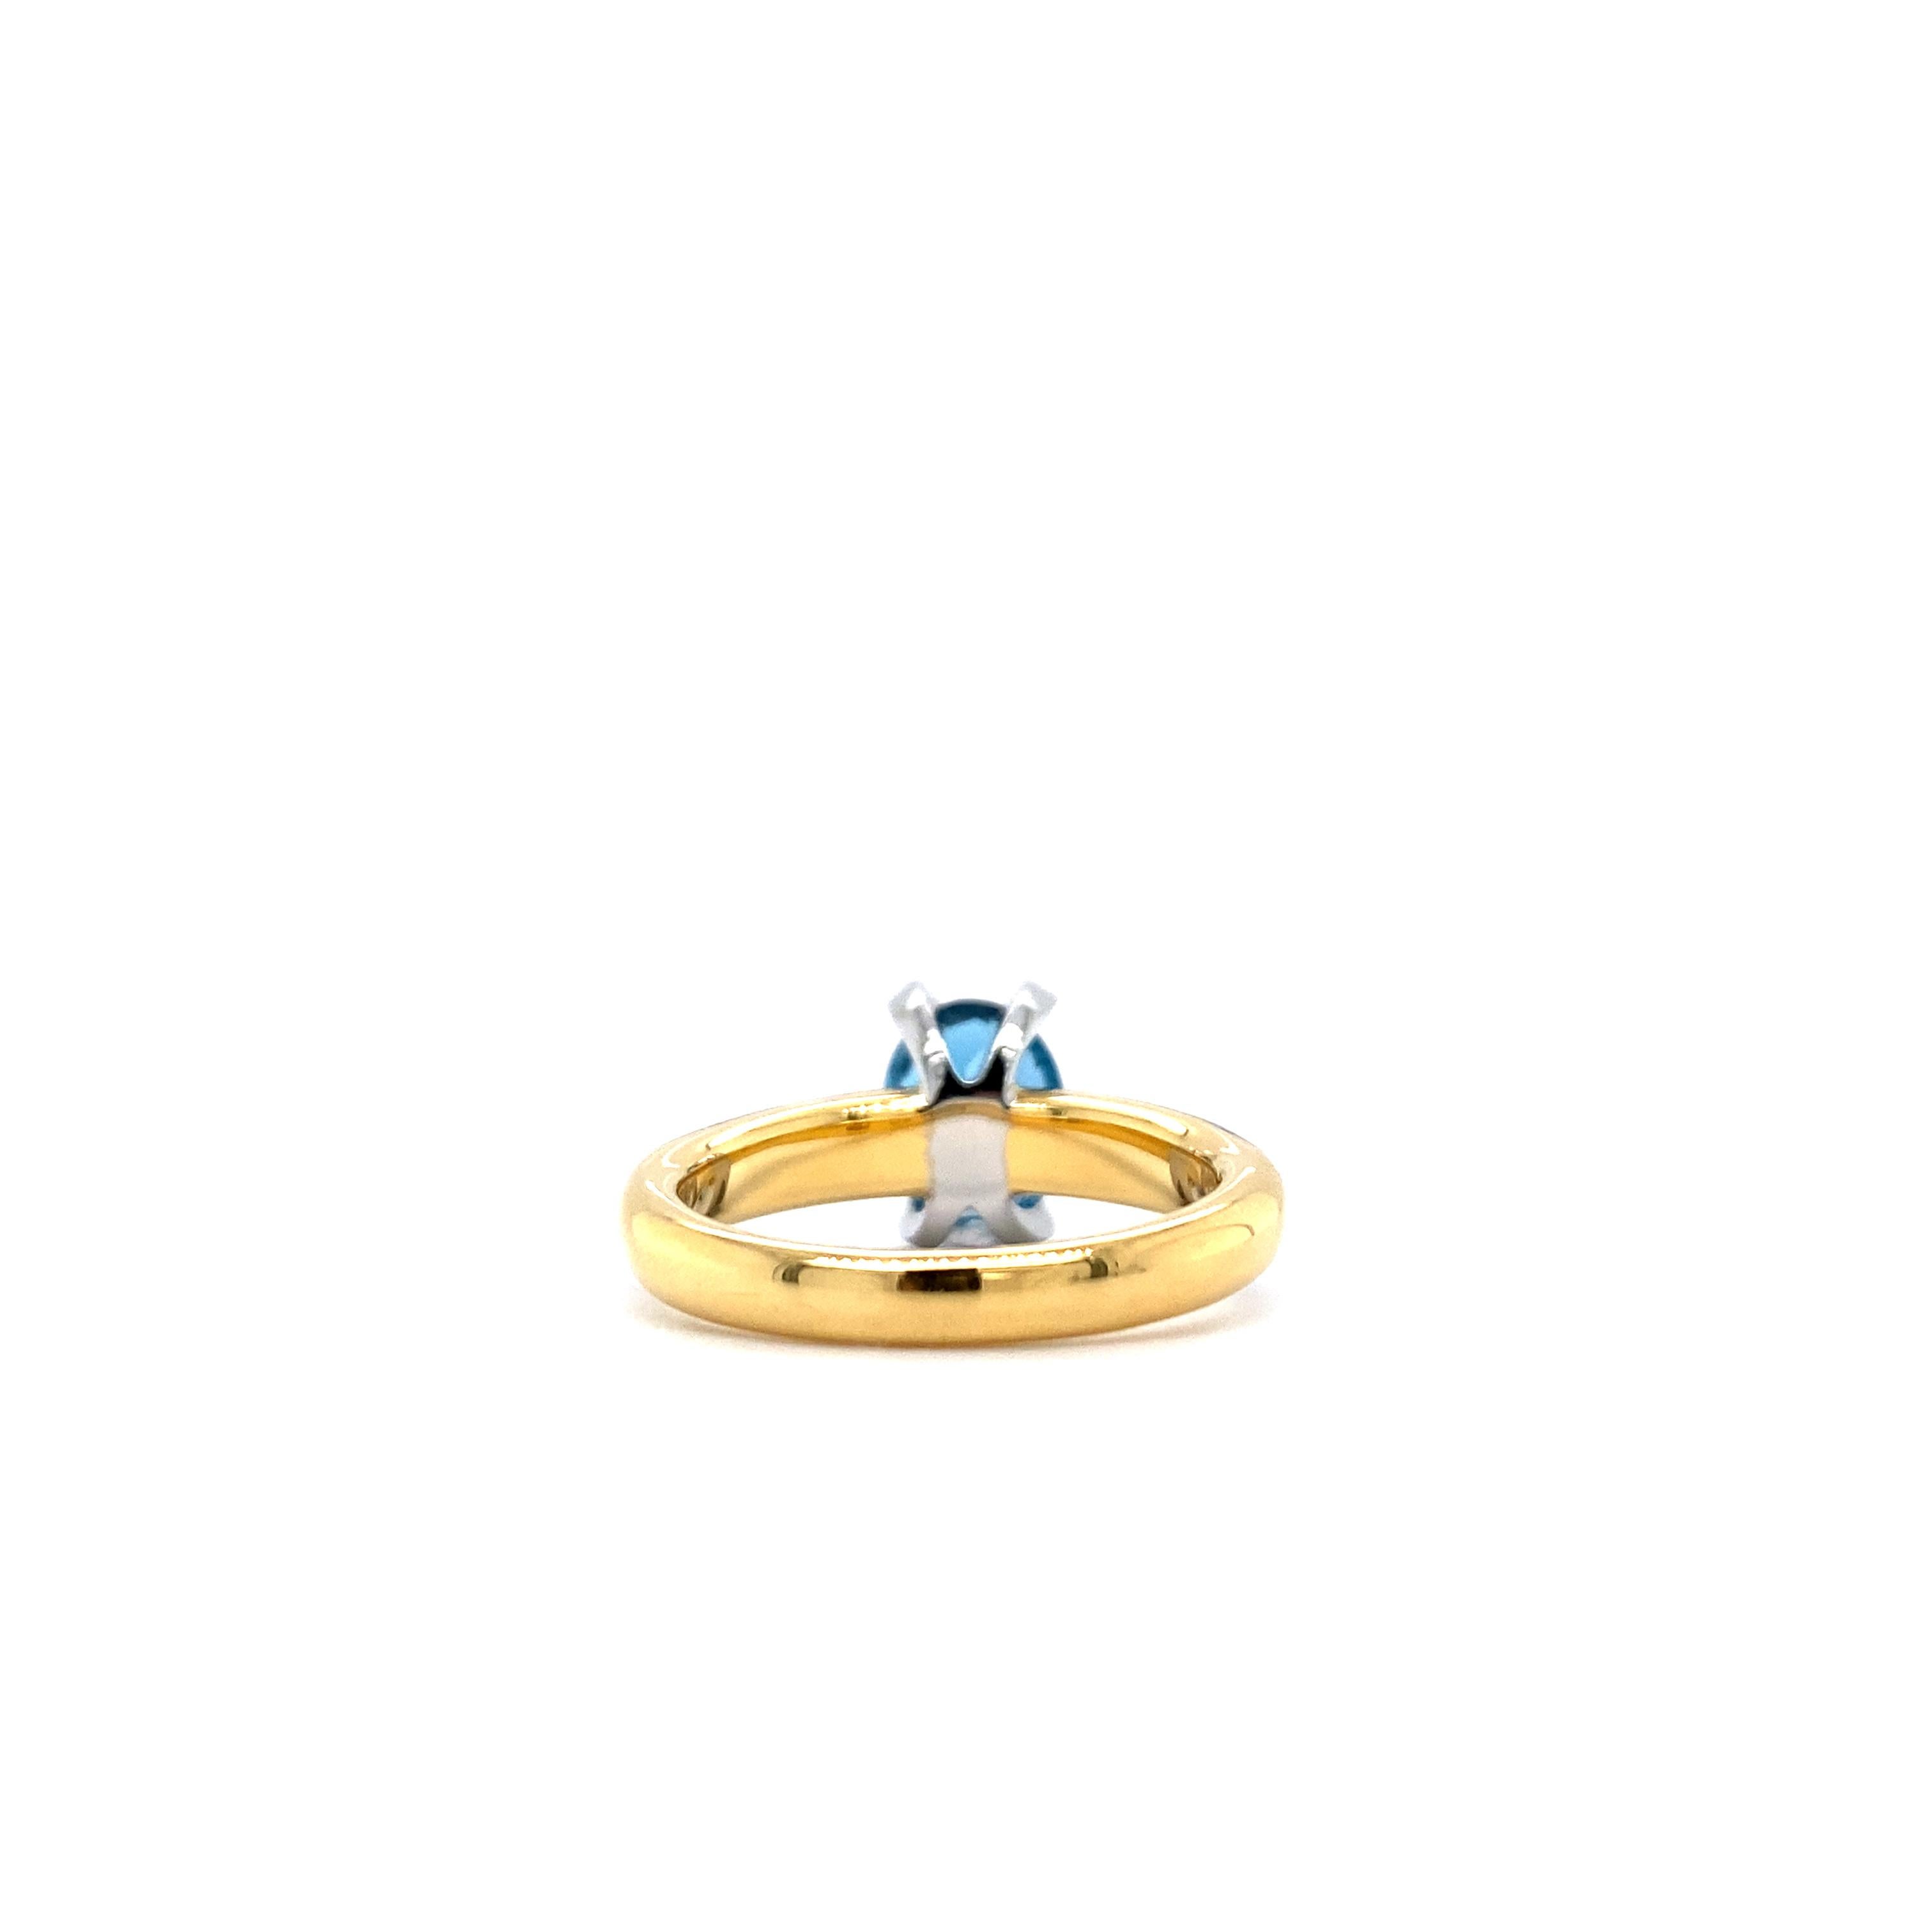 Brilliant Cut Cocktail Ring Petrol Enamel  18k Yellow /White Gold with 4 Diamonds blue topaz  For Sale